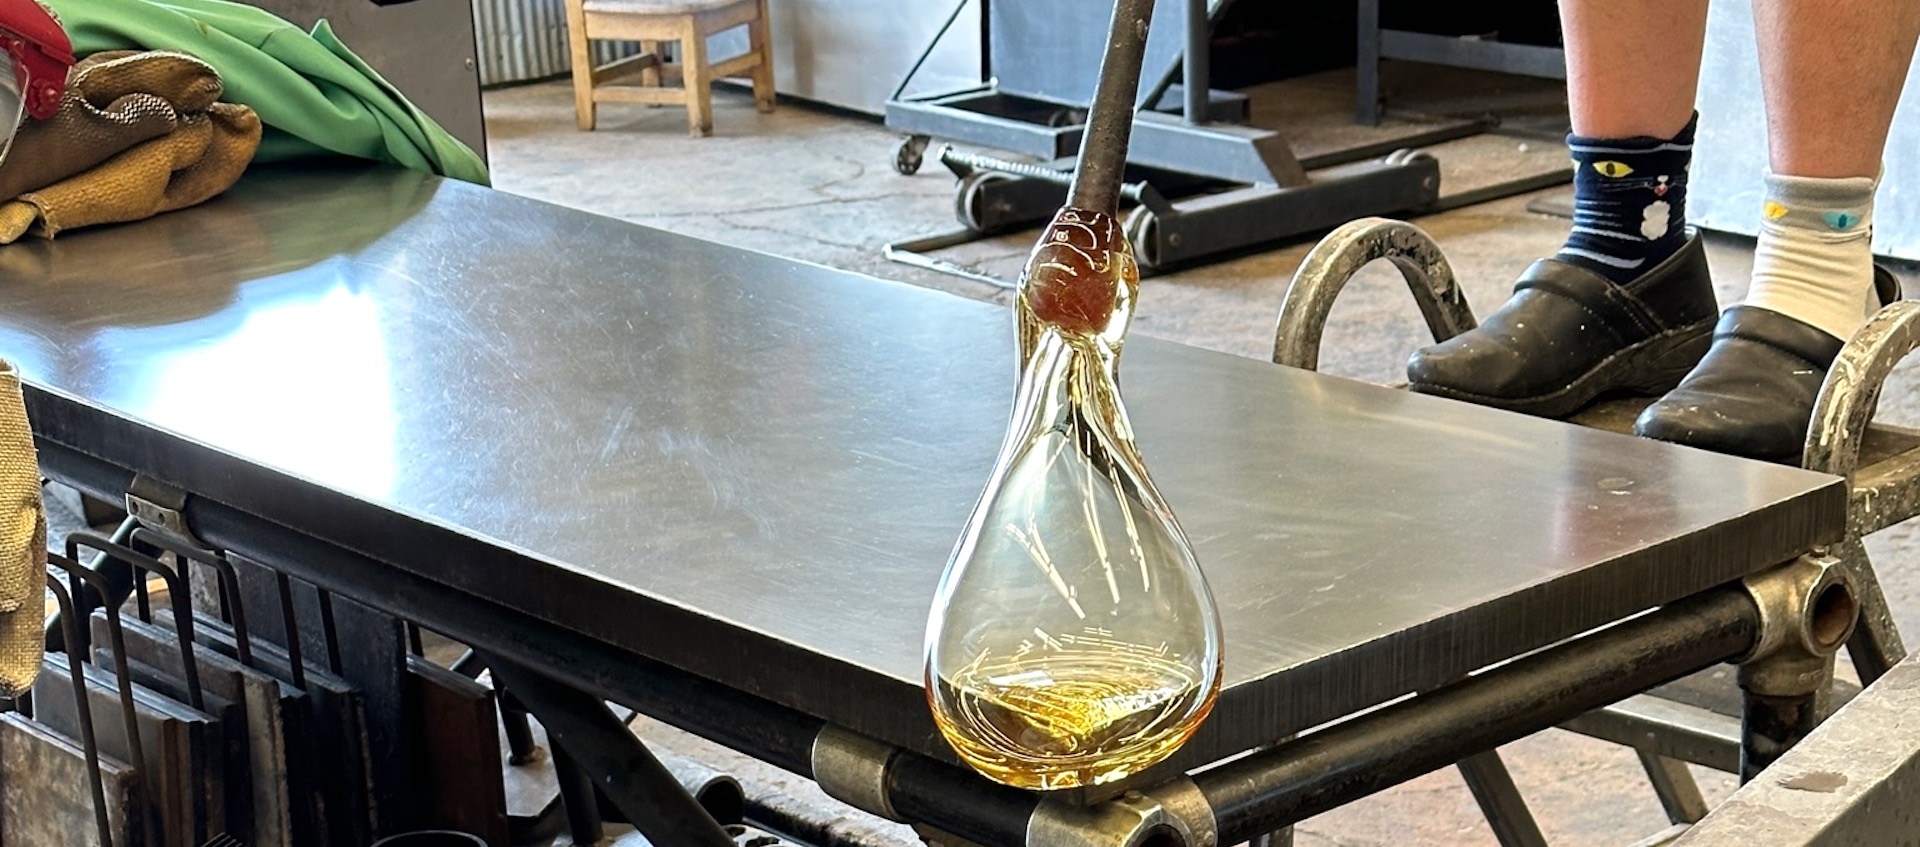 A teardrop-shaped clear glass form hangs from a metal pole over the edge of a metal table. The person holding the pole is partially visible.